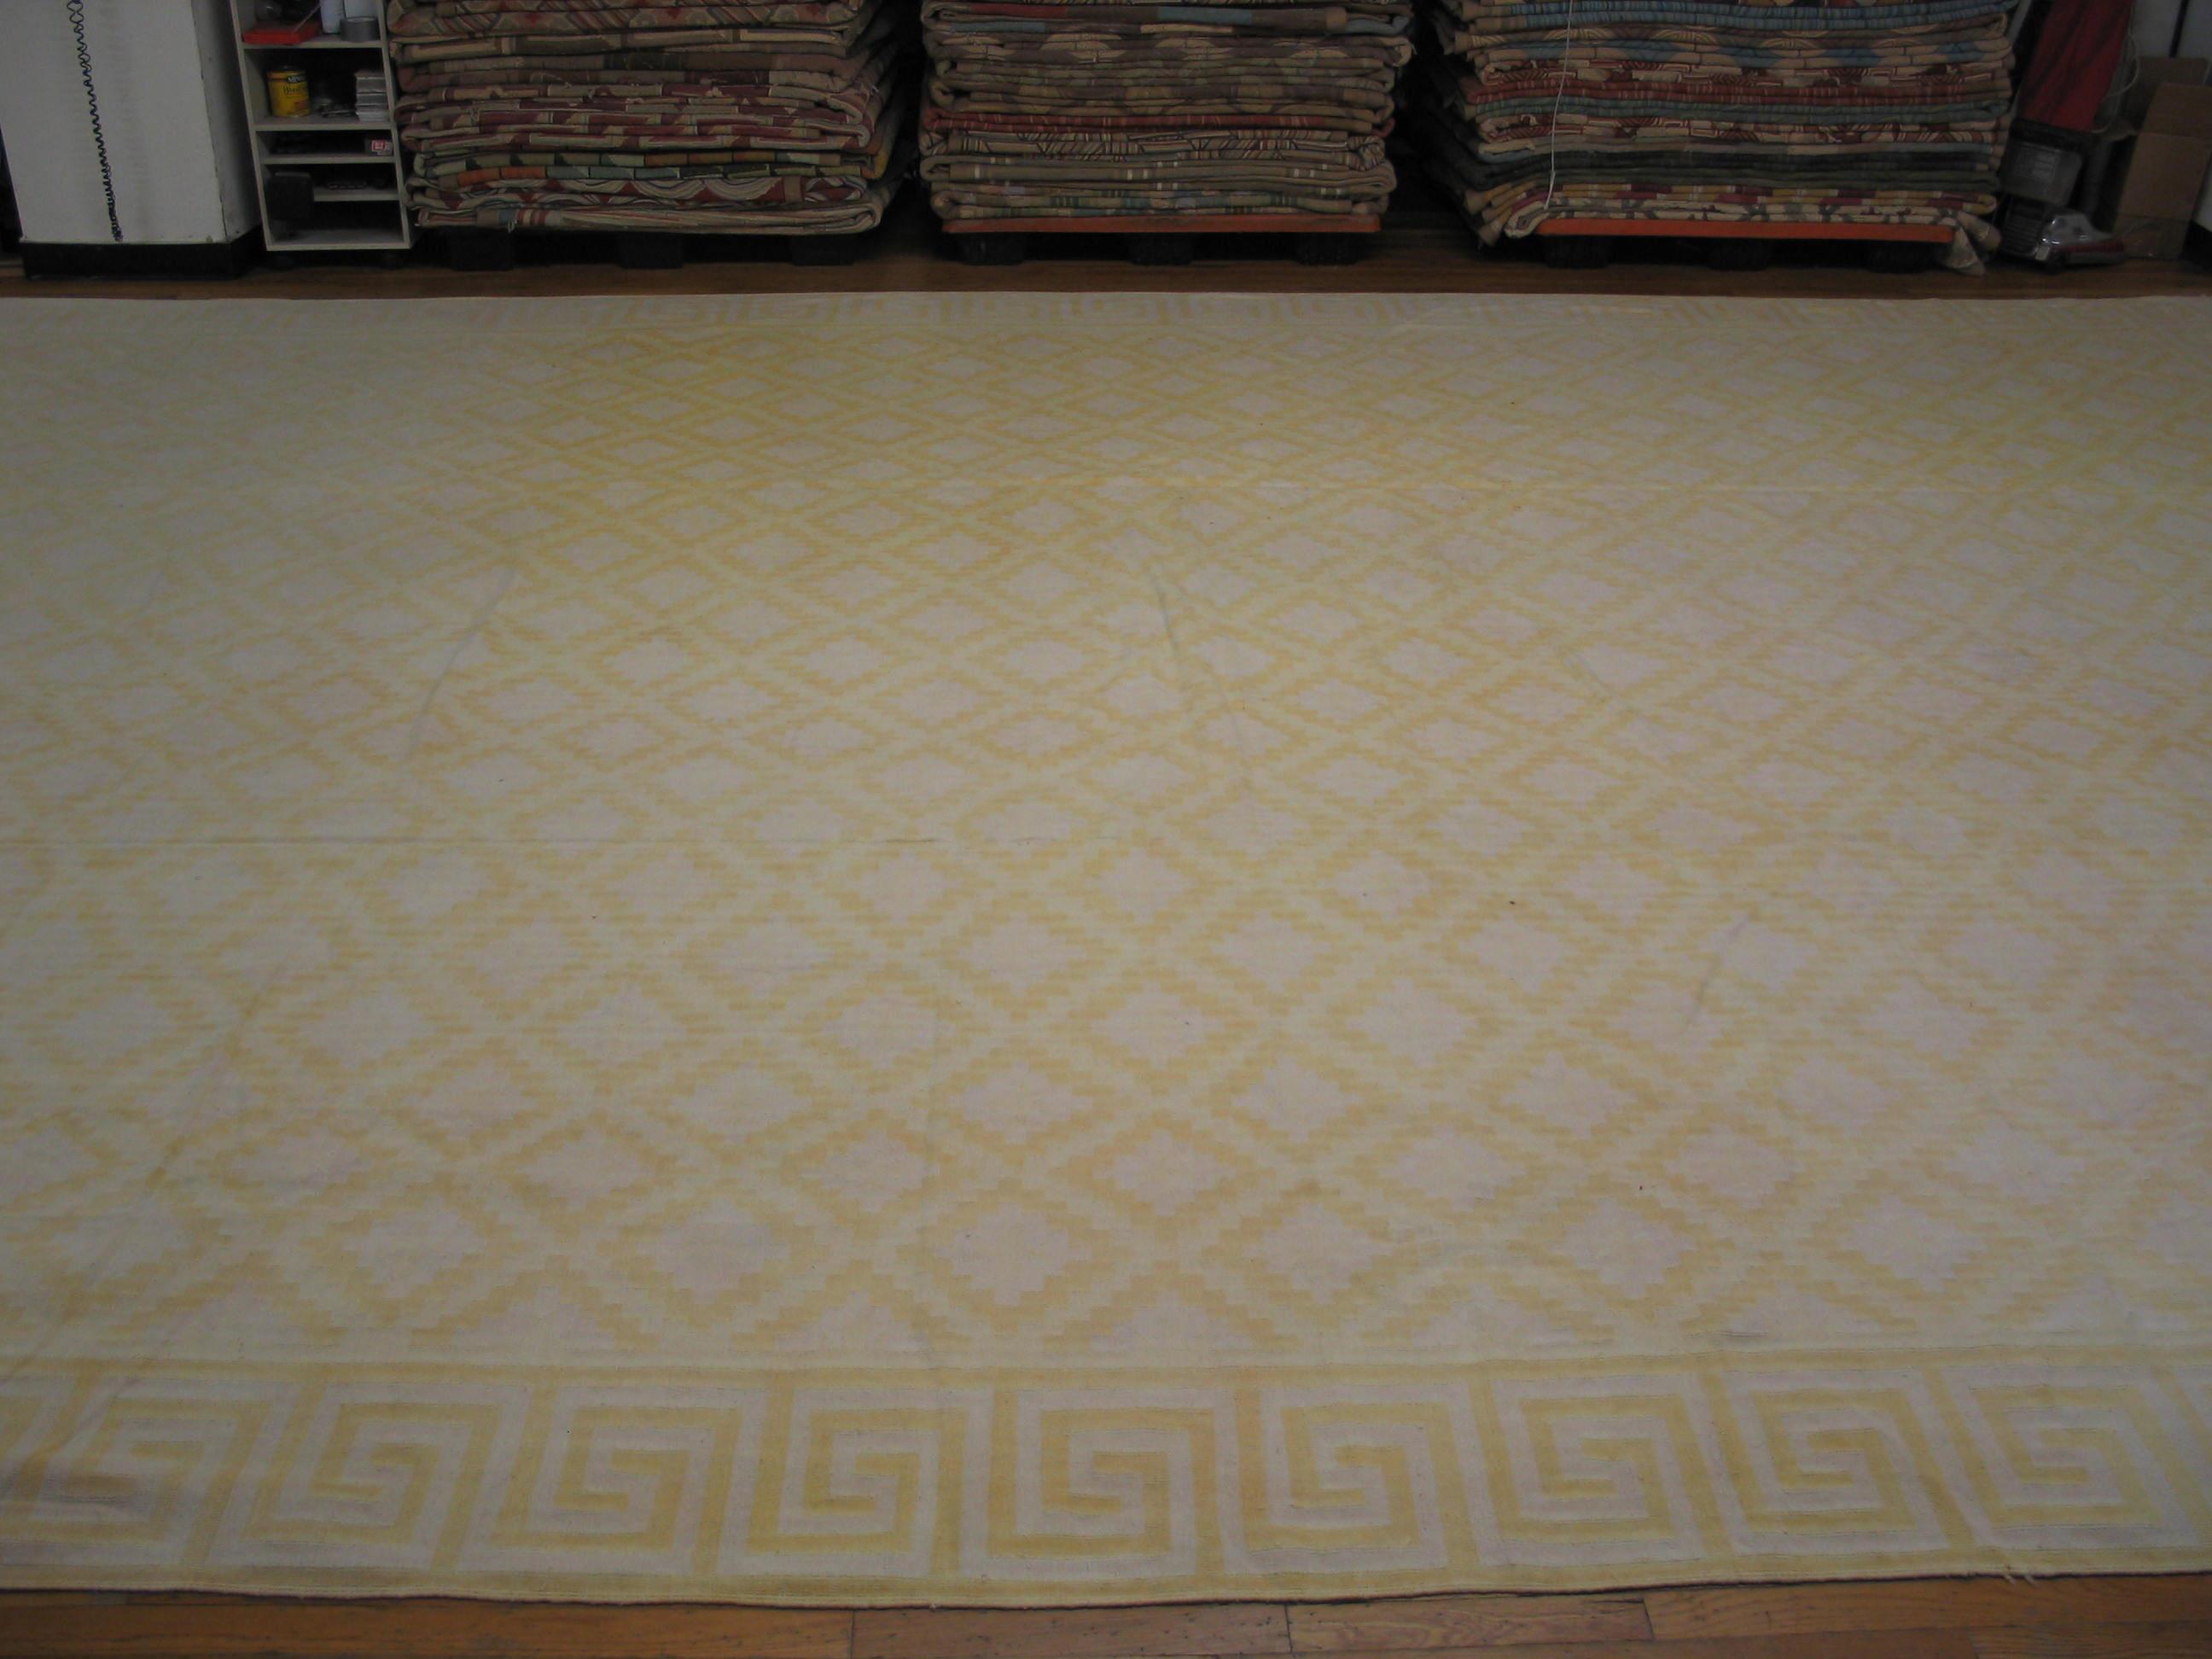 This giant all-cotton antique Indian flat-weave carpet shows a combination of two popular designs: a diaper of stepped diamonds within a conforming lattice, and a border employing a squared wave. The tonality is light, with light straw and cream.